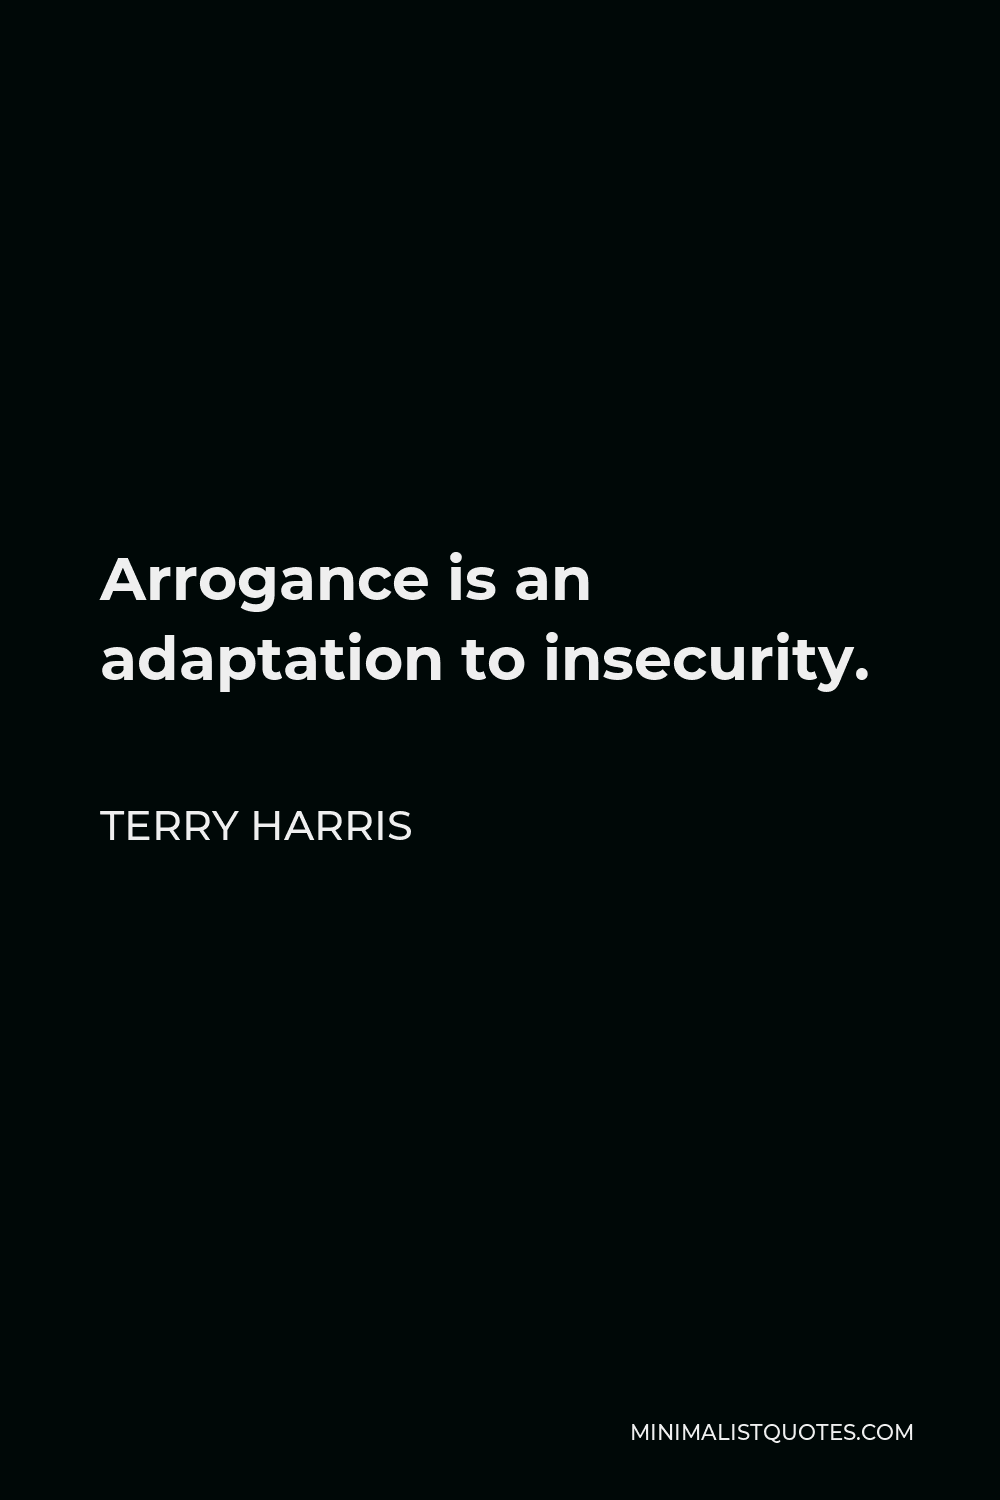 Terry Harris Quote - Arrogance is an adaptation to insecurity.